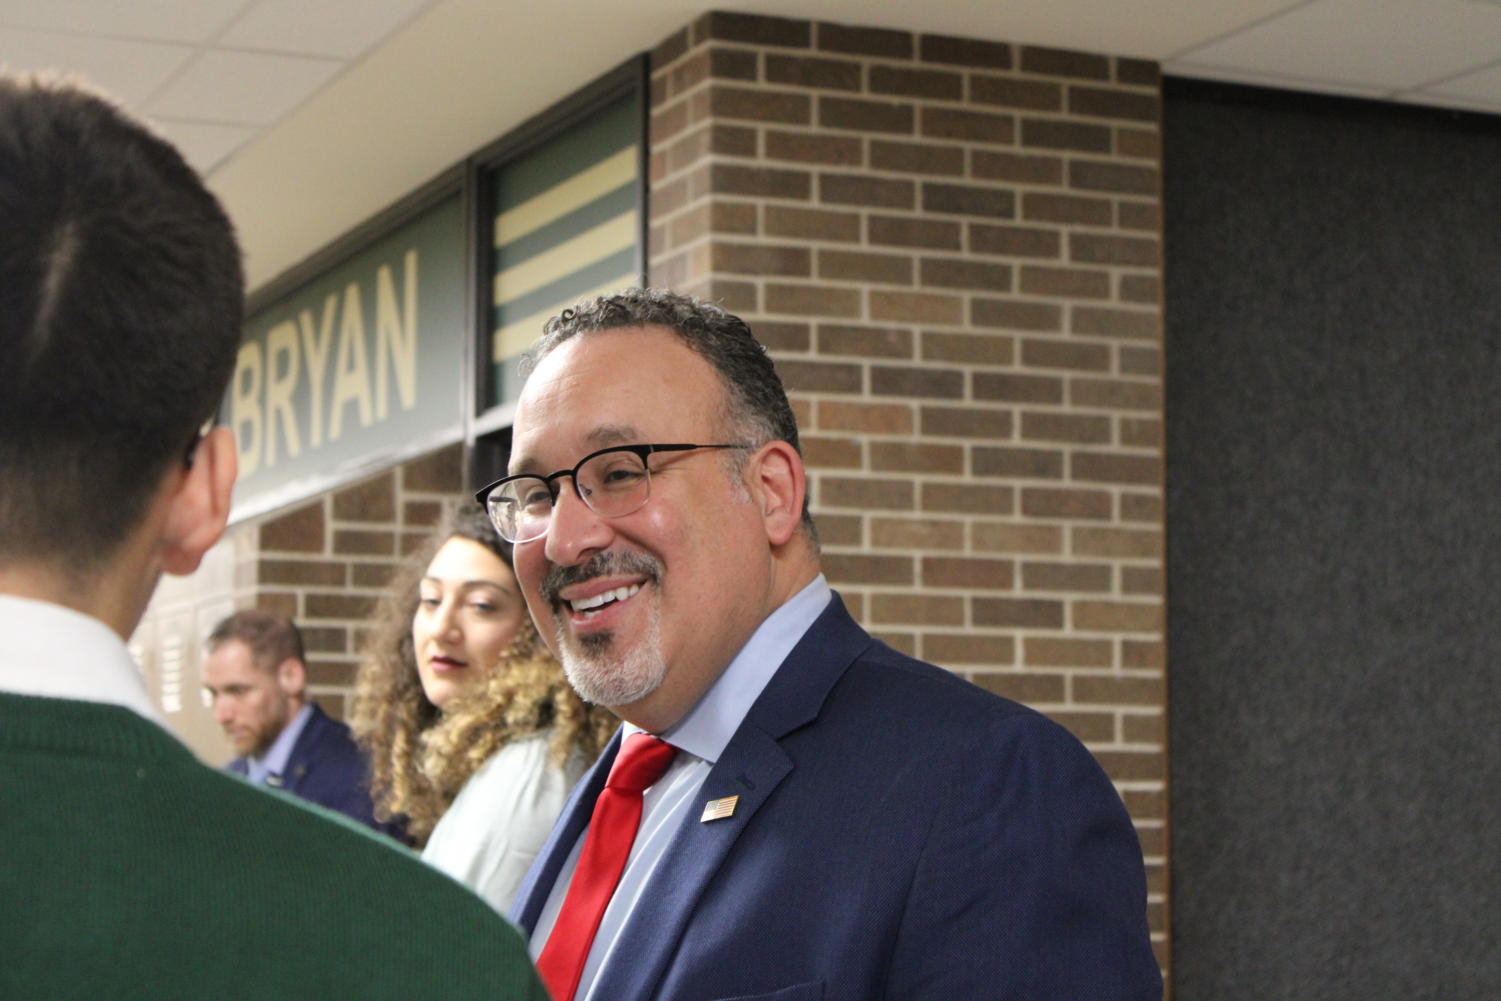 United States Secretary of Education, Miguel Cardona, smiles as he tours Omaha Bryan High school on February 8. Cardona visited the school in pursuit of learning more about their College & Career Academies and Pathways. 
PHOTO BY VIVIAN LANDIS